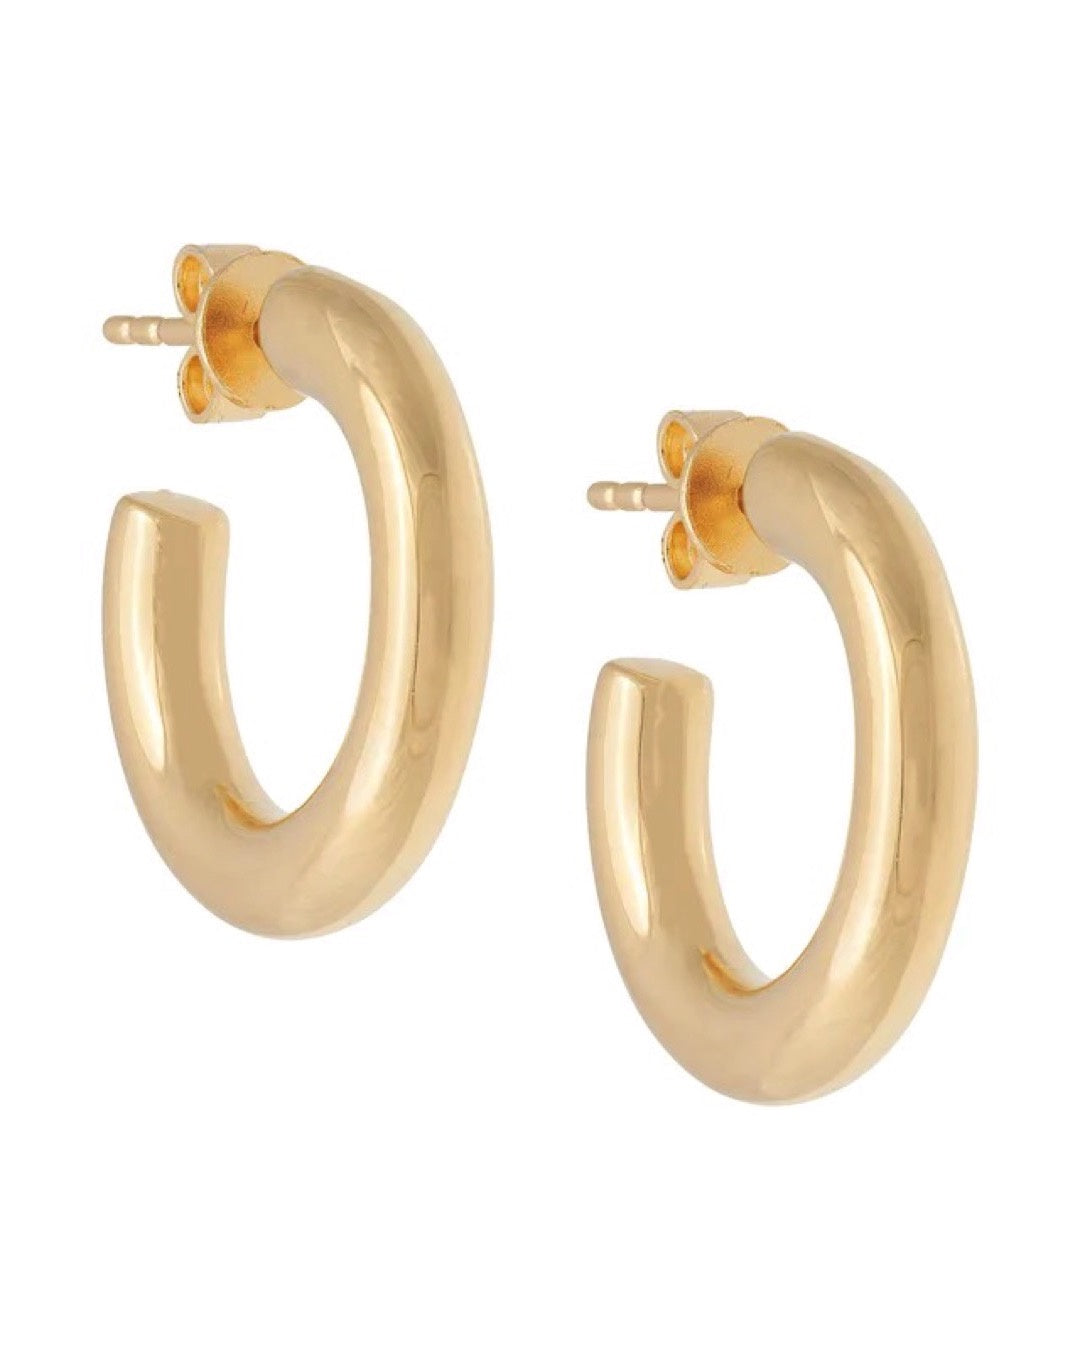 Mini Mother Hoops Earrings by YCL Jewels - Prae Store